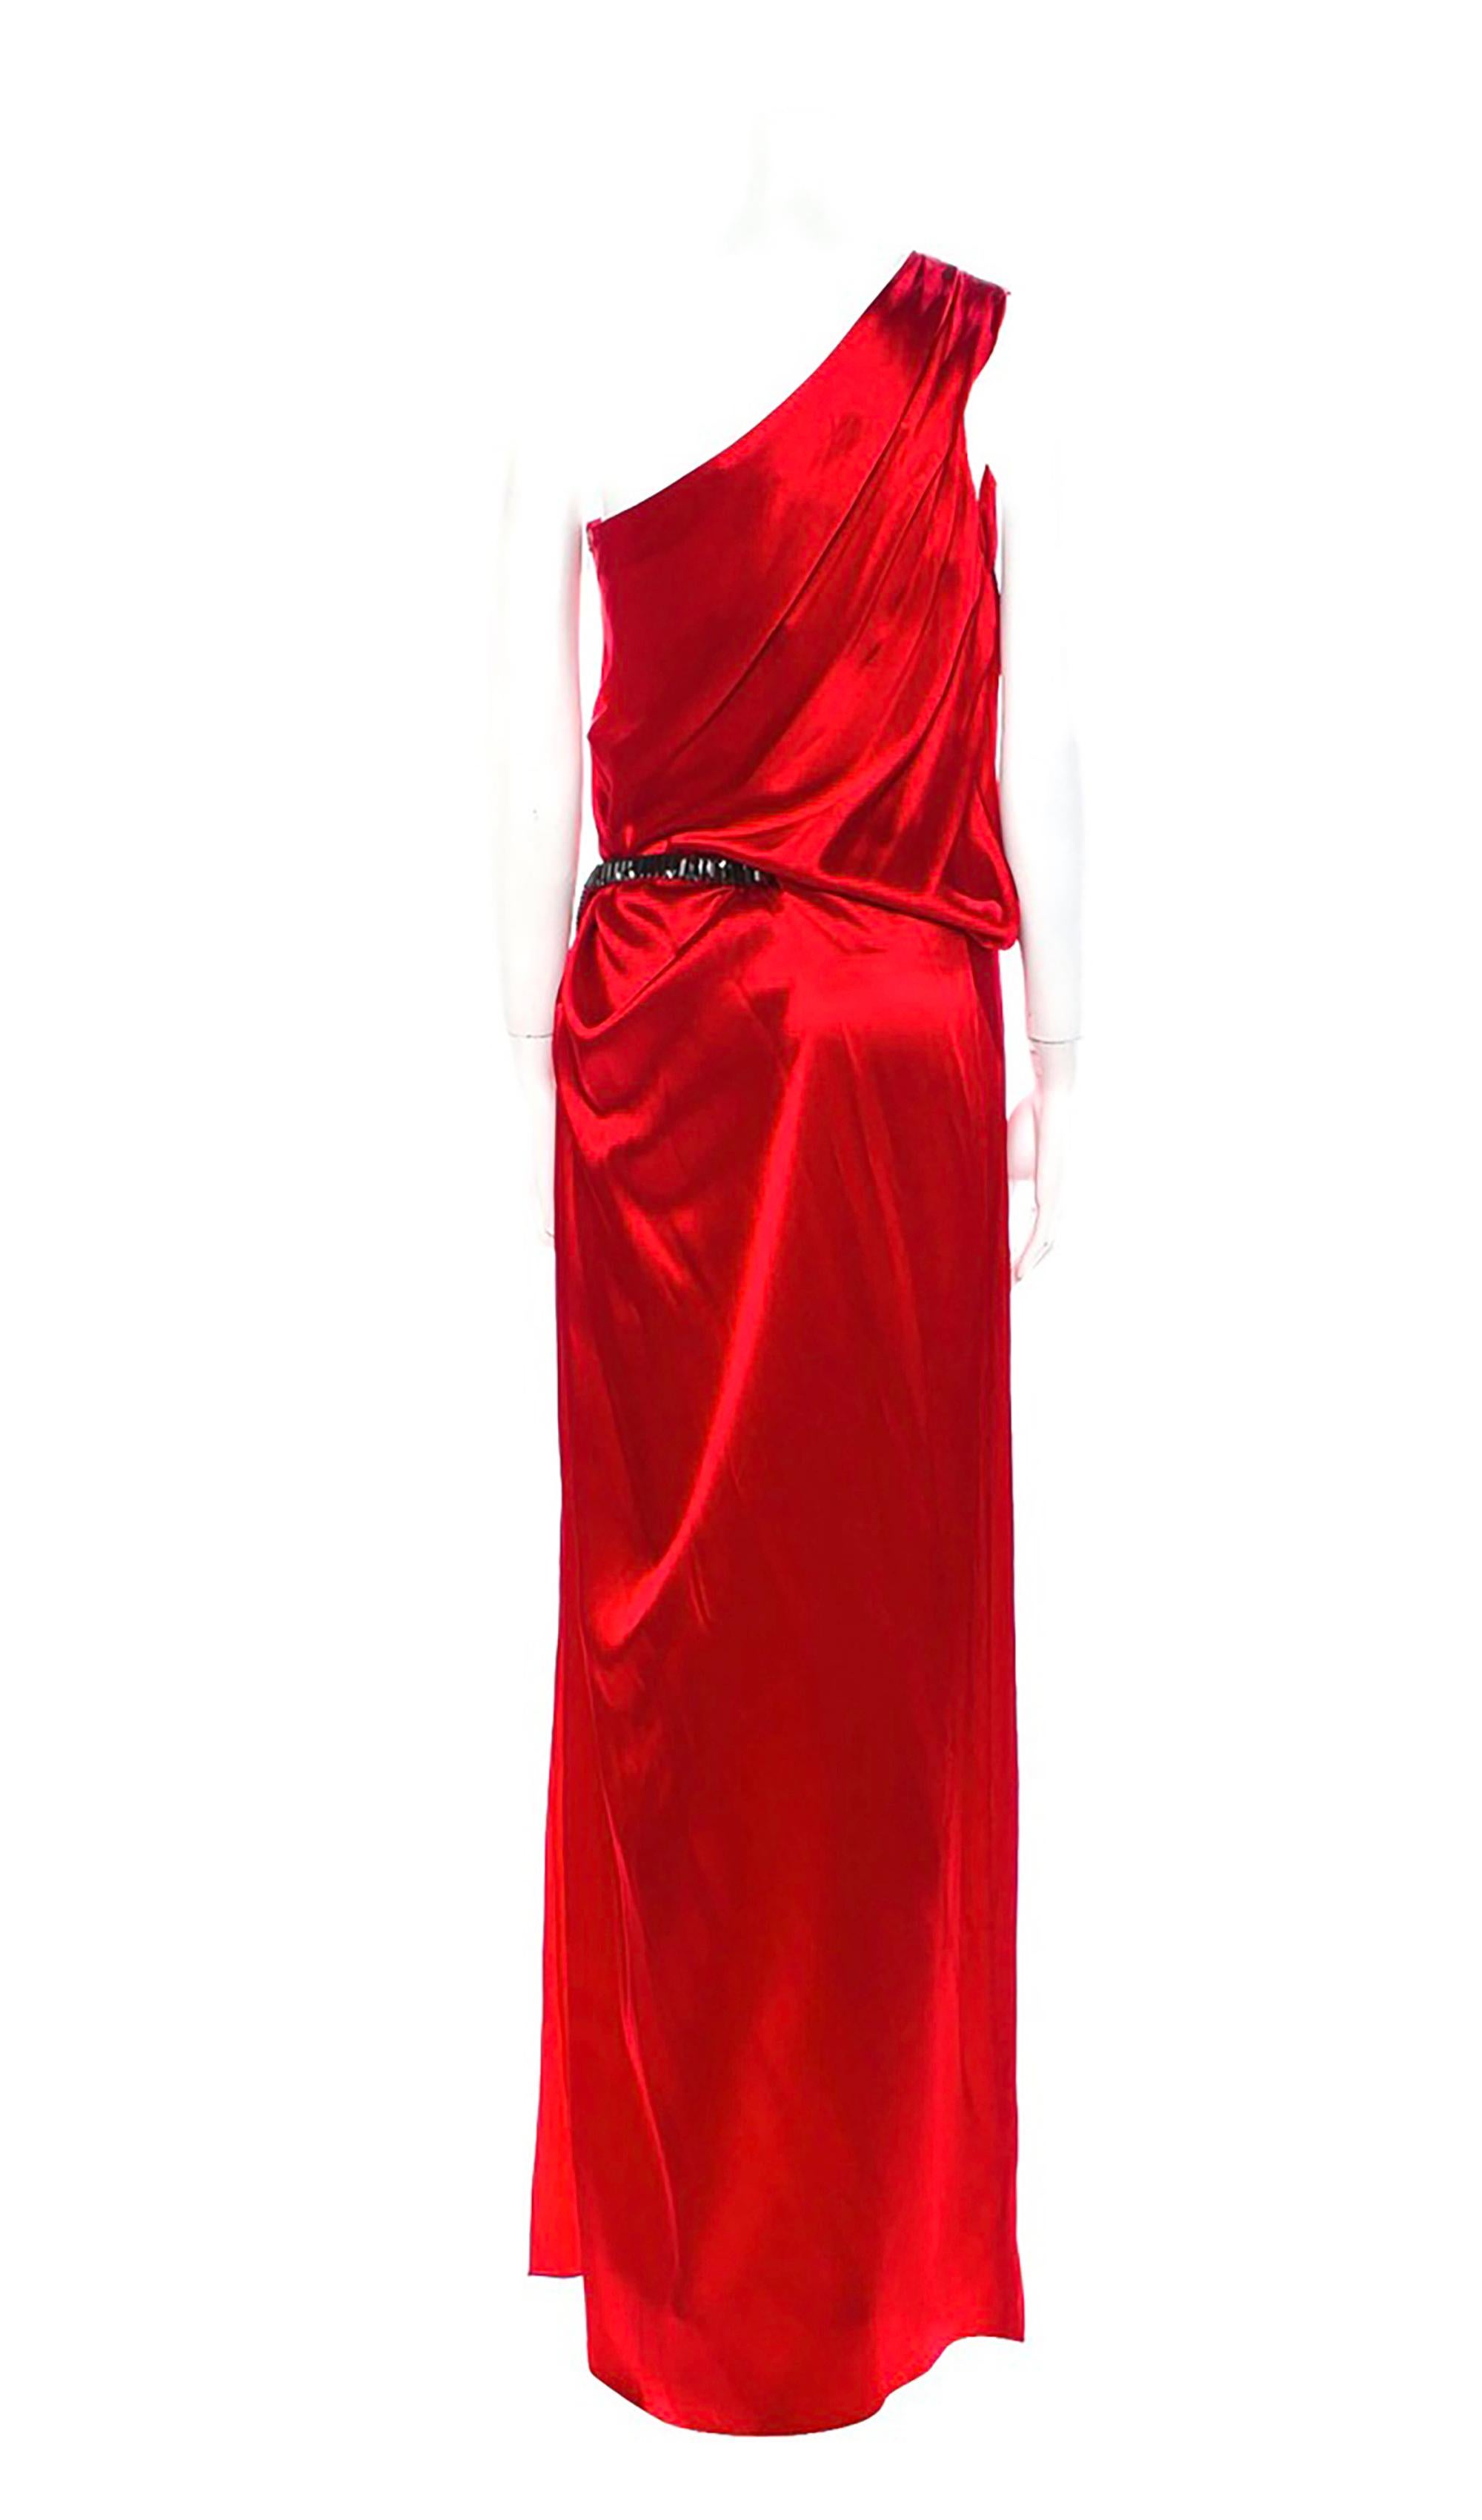 Roberto Cavalli Red One Shoulder Evening Gown
68% acetate, 32% viscose, combo 100% silk
Condition: Excellent
29